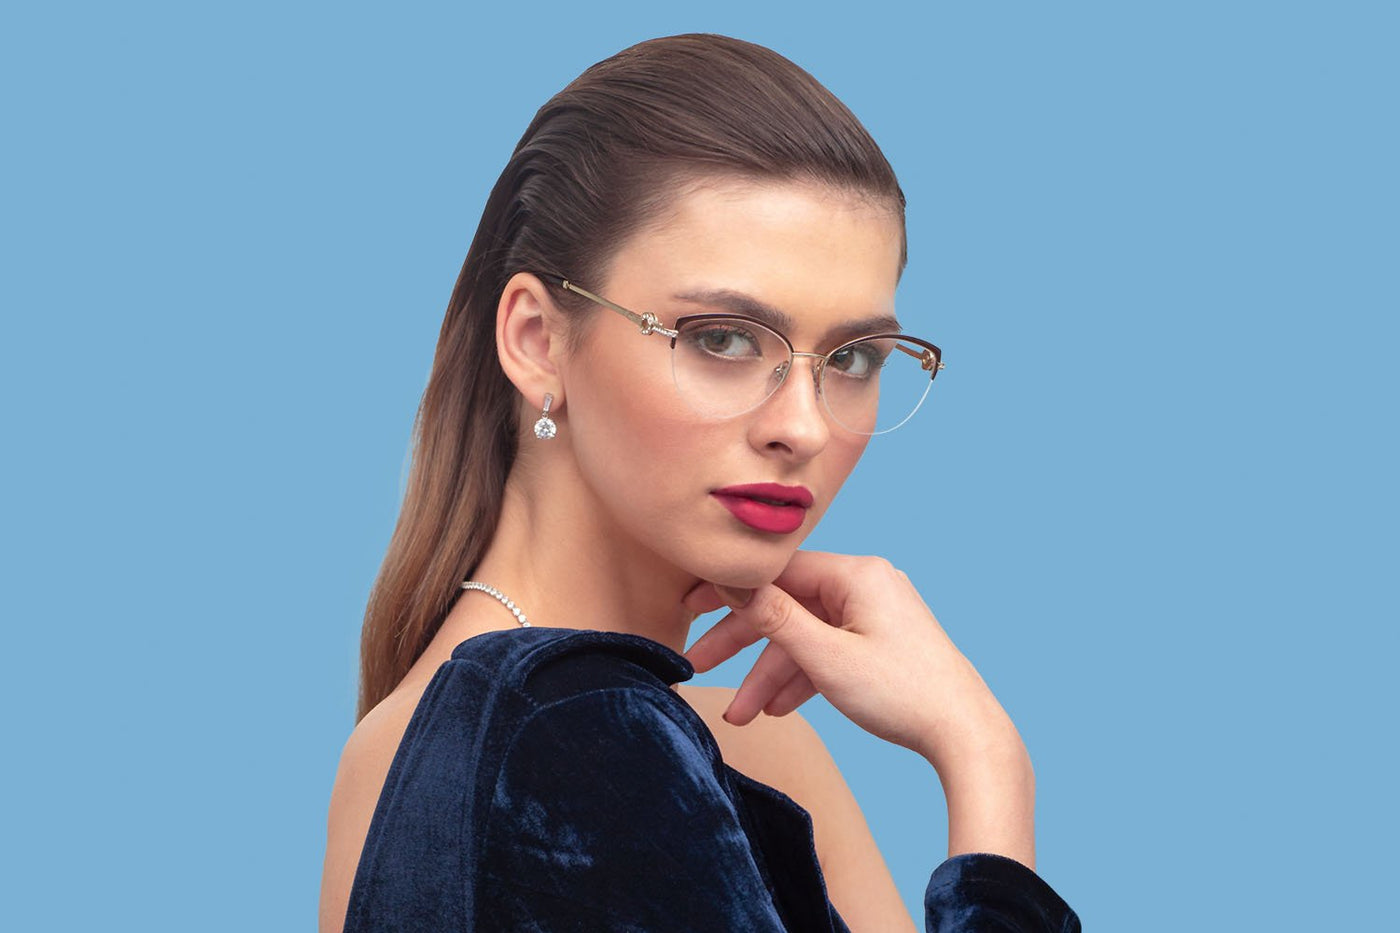 Eyewear Trends That Will Win Over 2020 - Vision Express Philippines